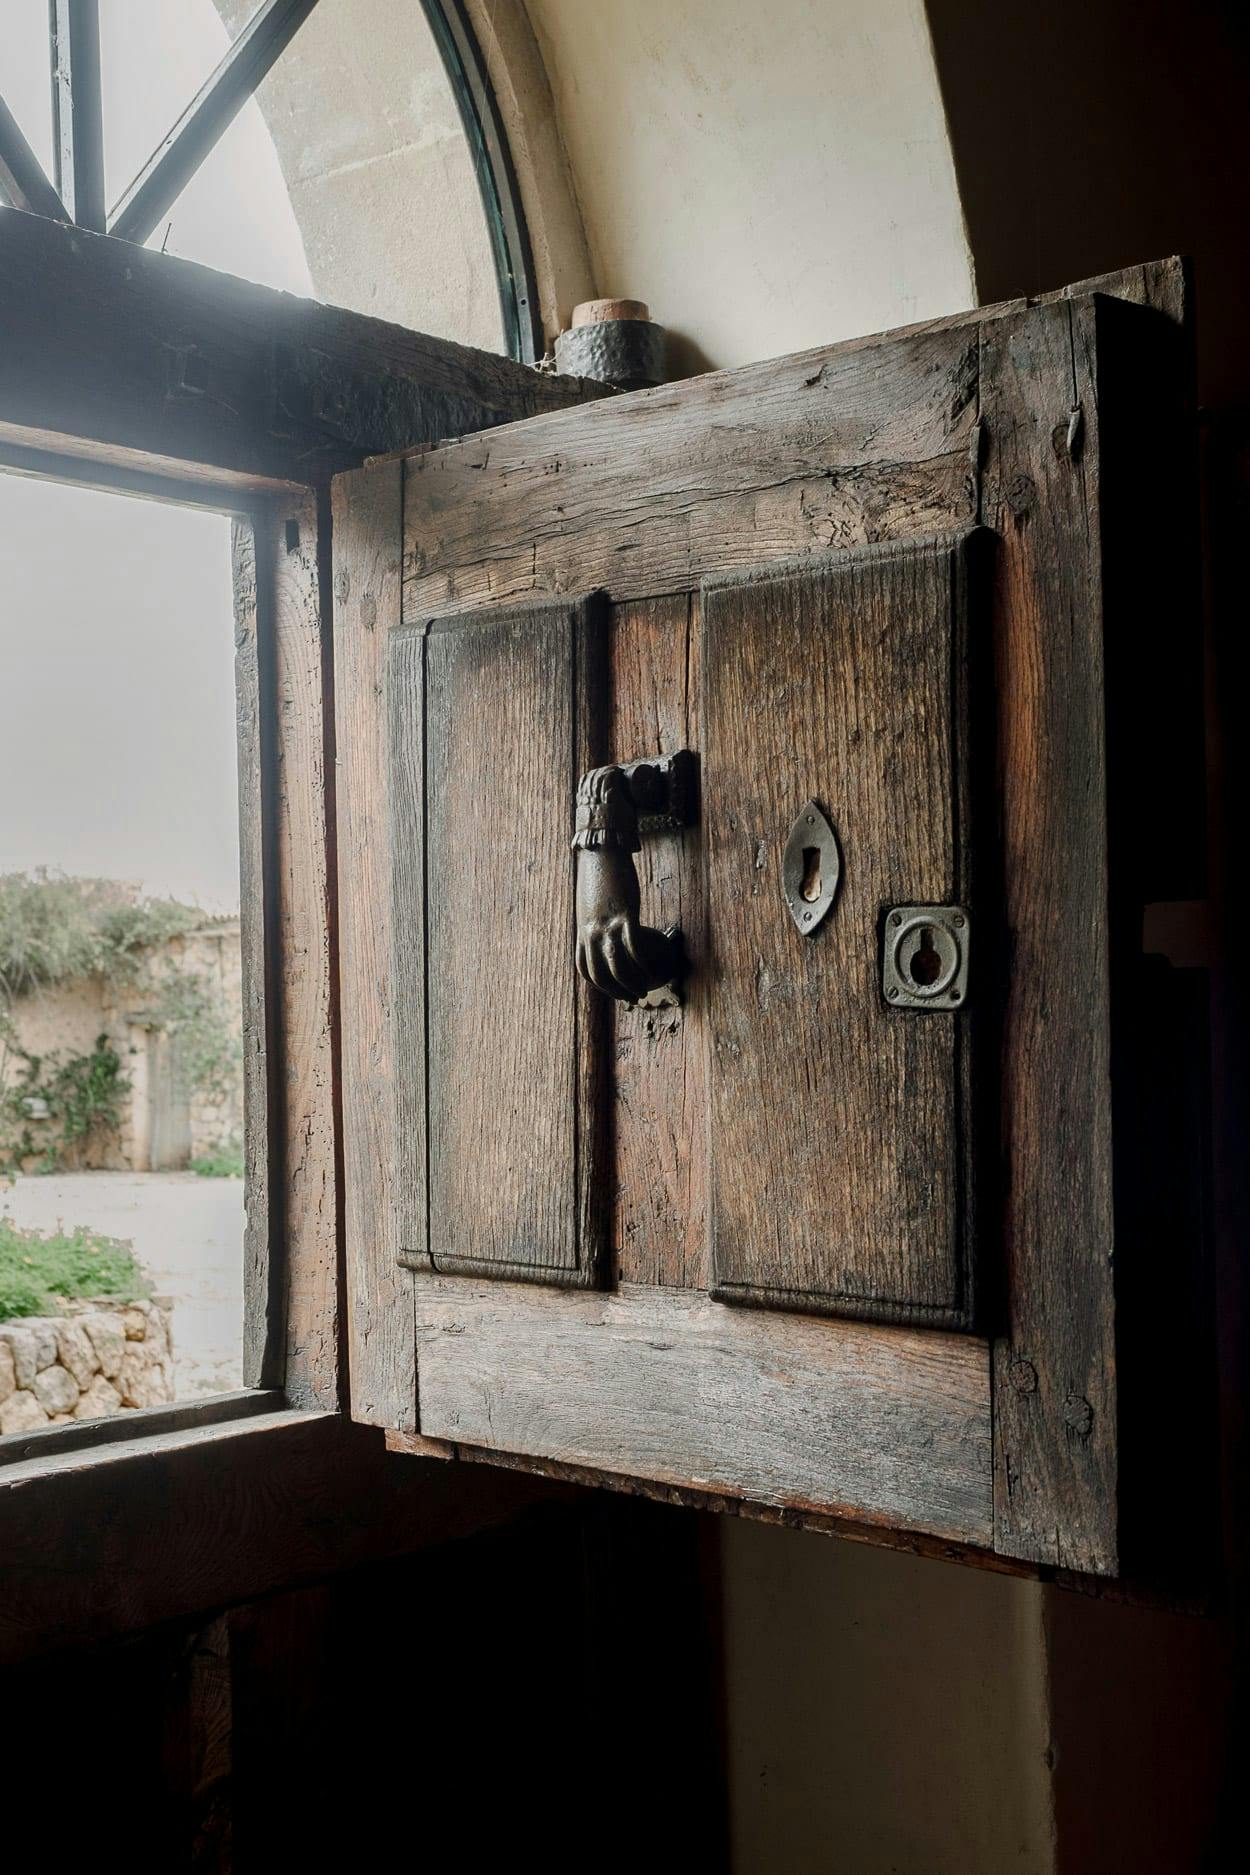 A wooden door with a metal lock is open, revealing a view of a field outside.